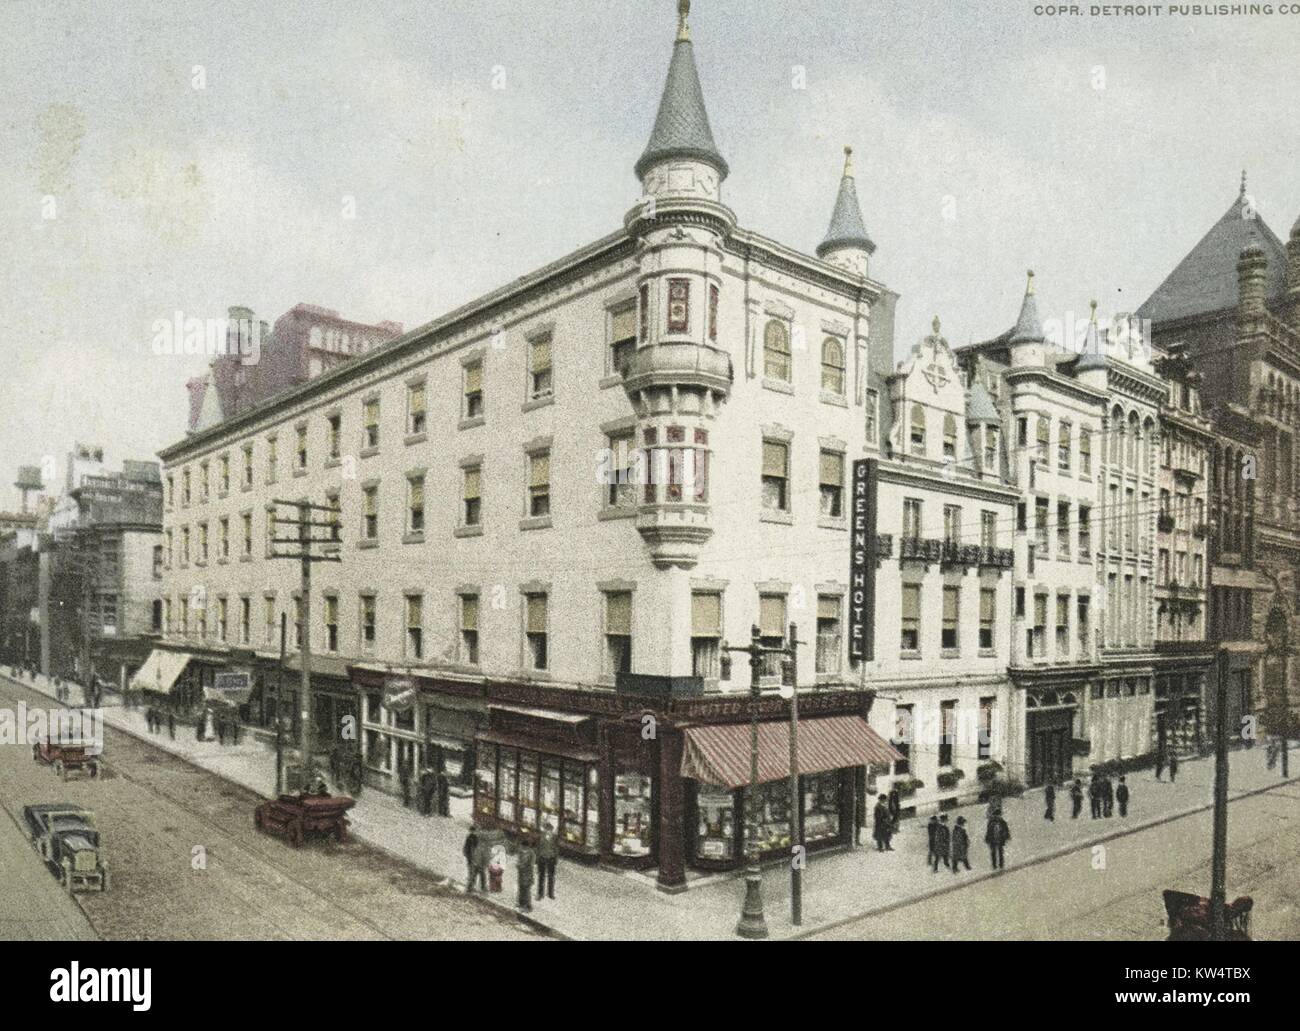 Postcard of the exterior of Green's Hotel, Philadelphia, Pennsylvania, 1914. From the New York Public Library. Stock Photo